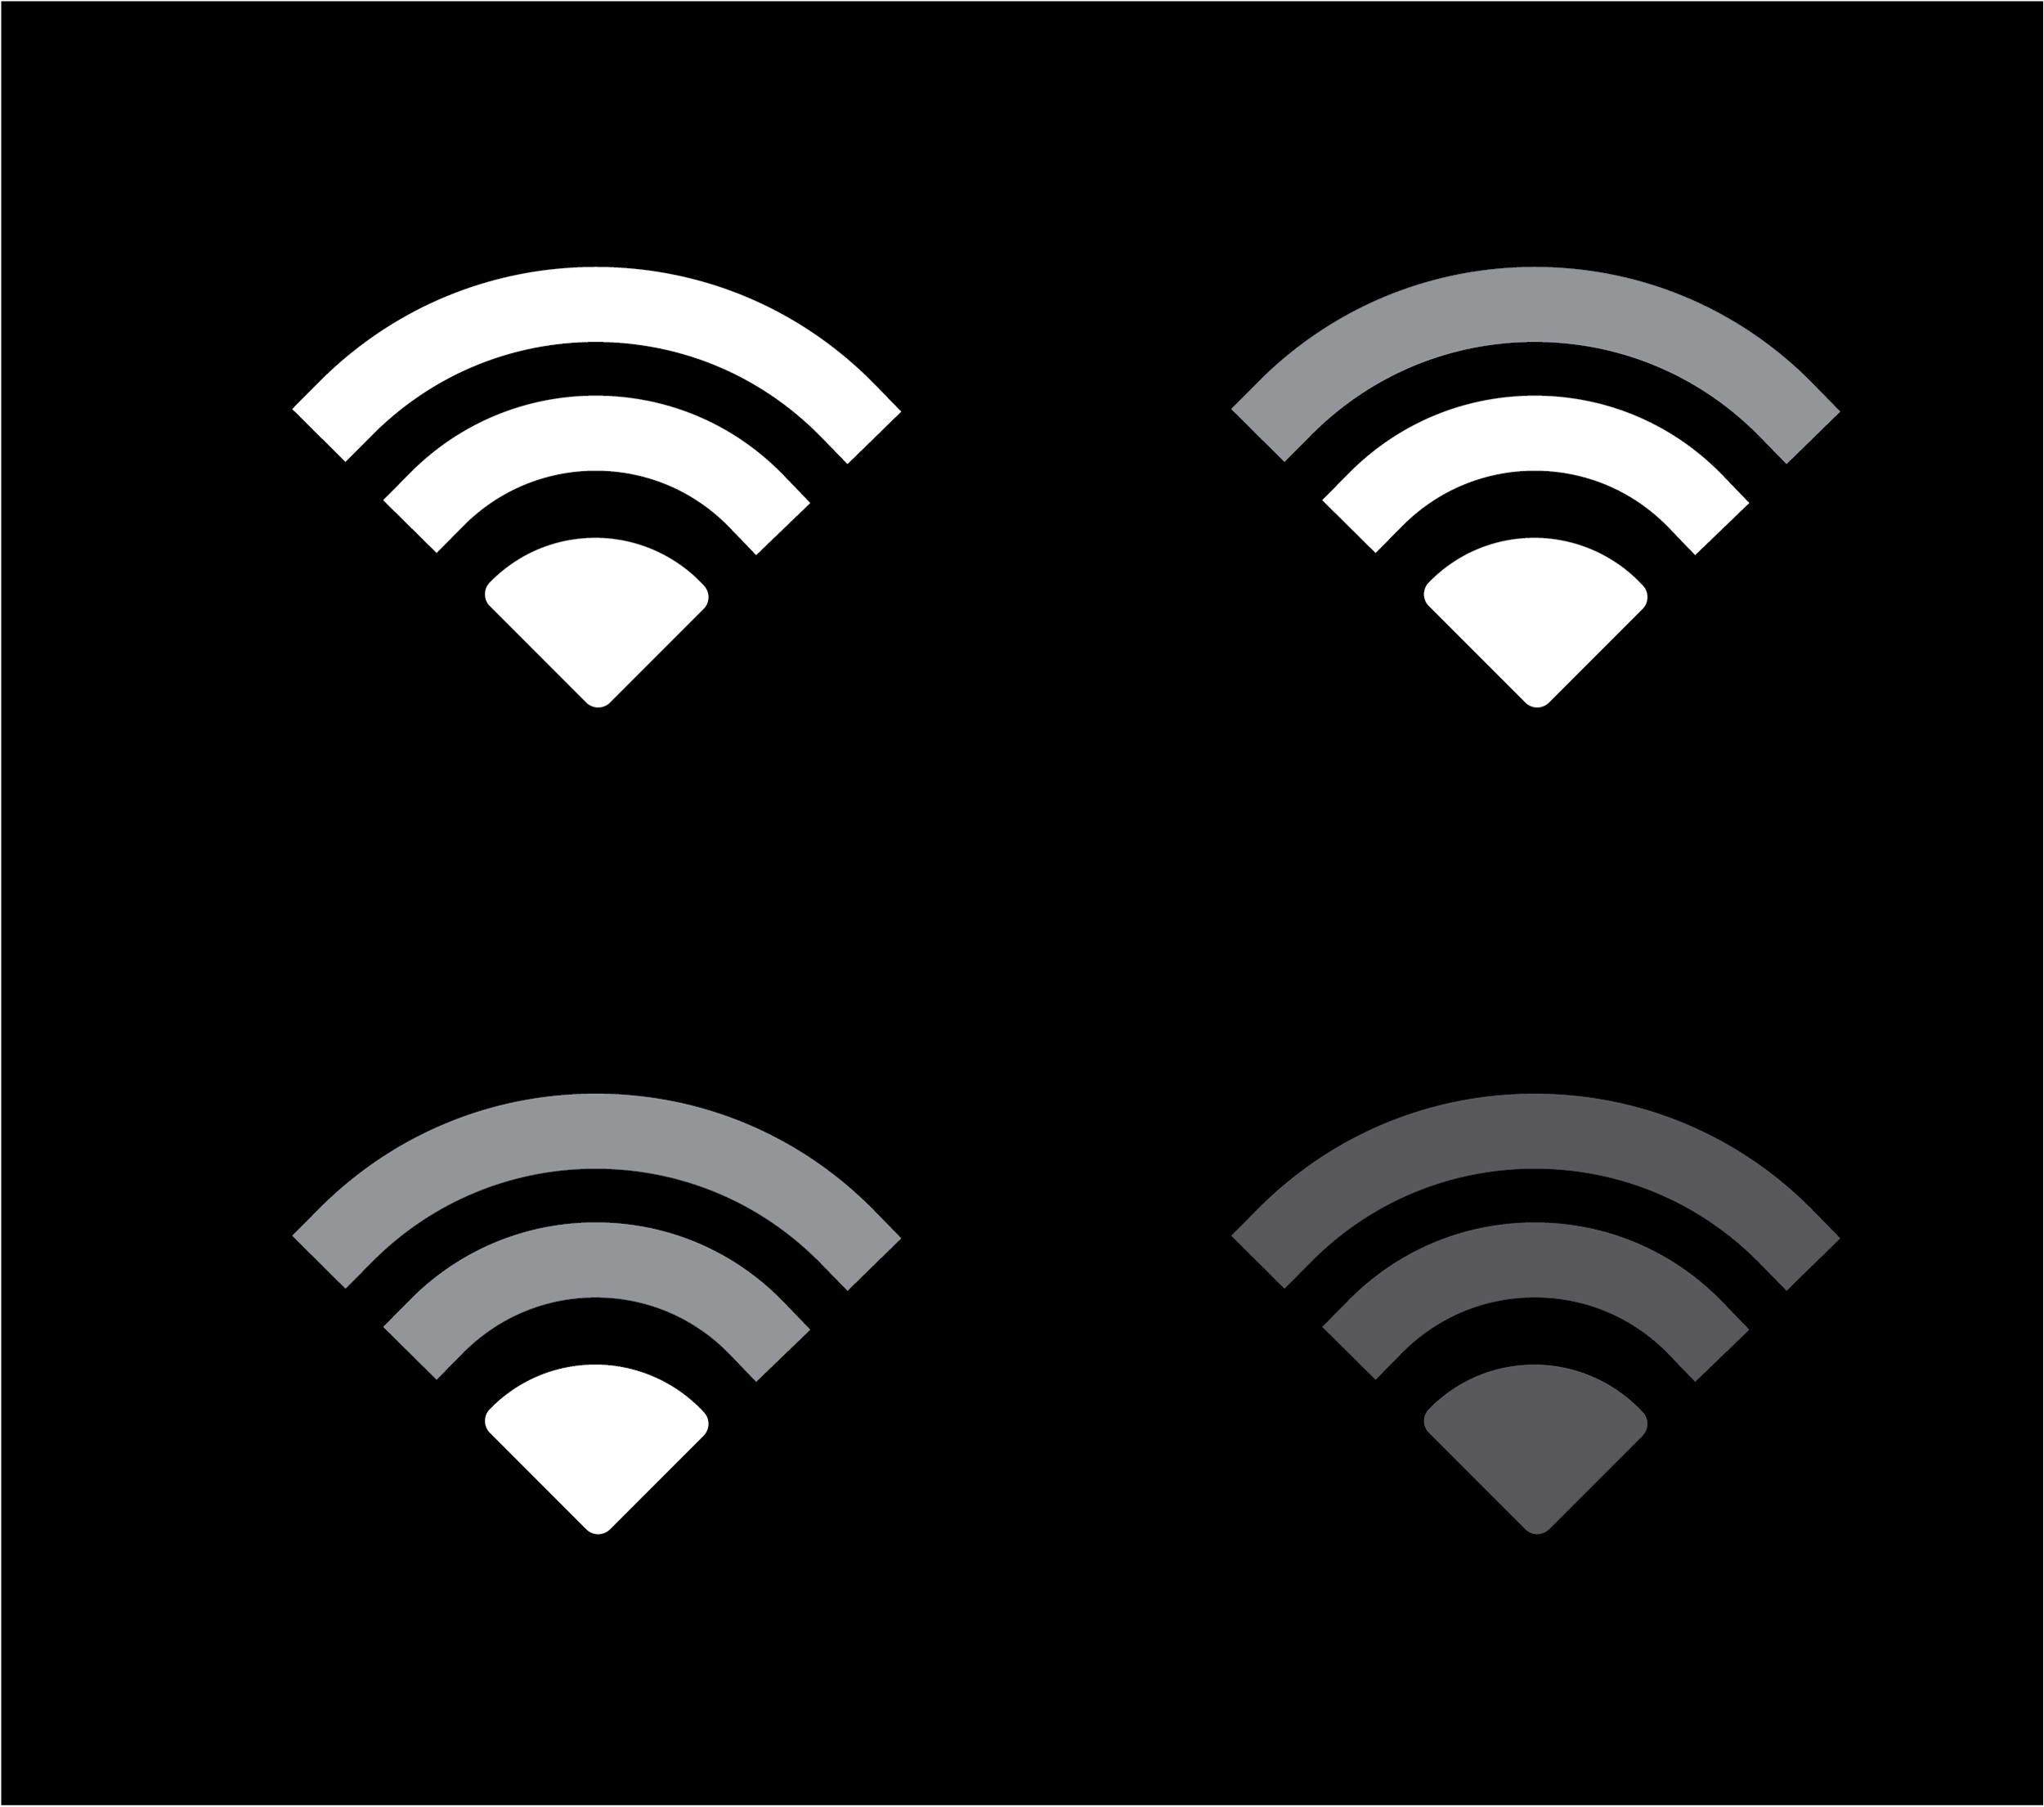 Examples of signal strength from wireless networking